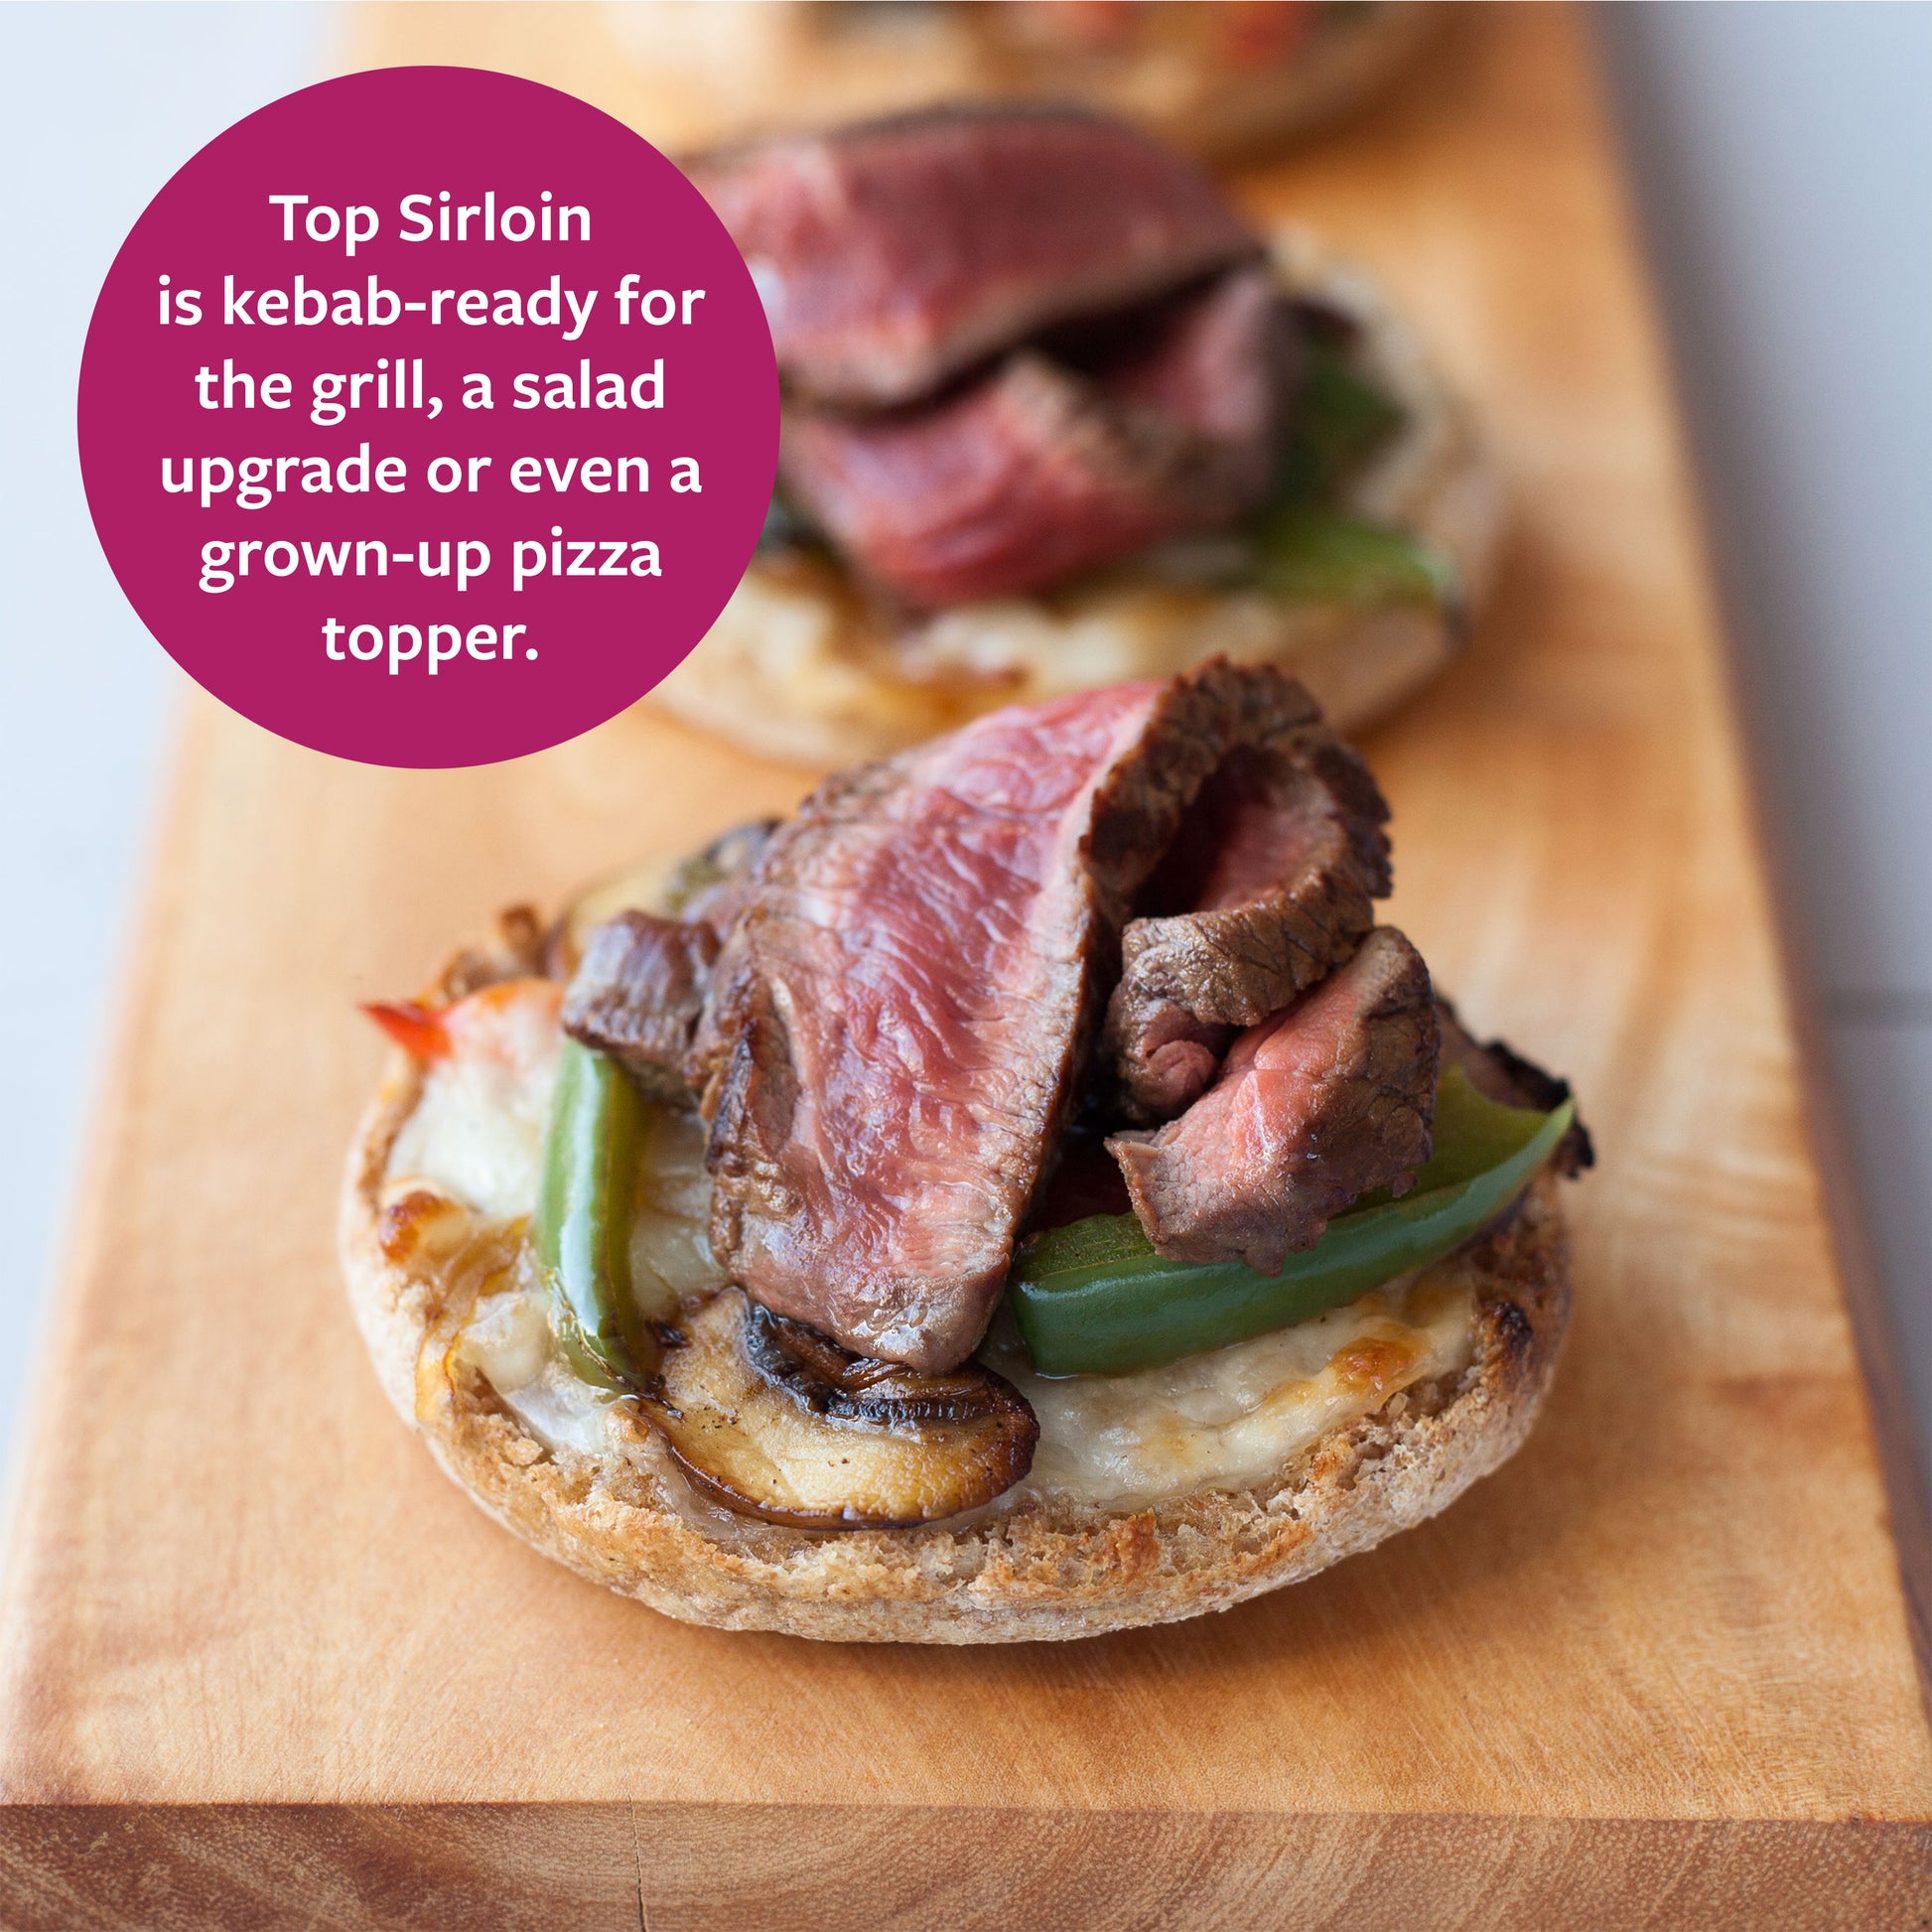 Top Sirloin is kebab ready for the grill, a salad upgrade, or even a grown-up pizza topper. (A picture of top sirloin sliced on a piece of bread with mushroom and pepper)